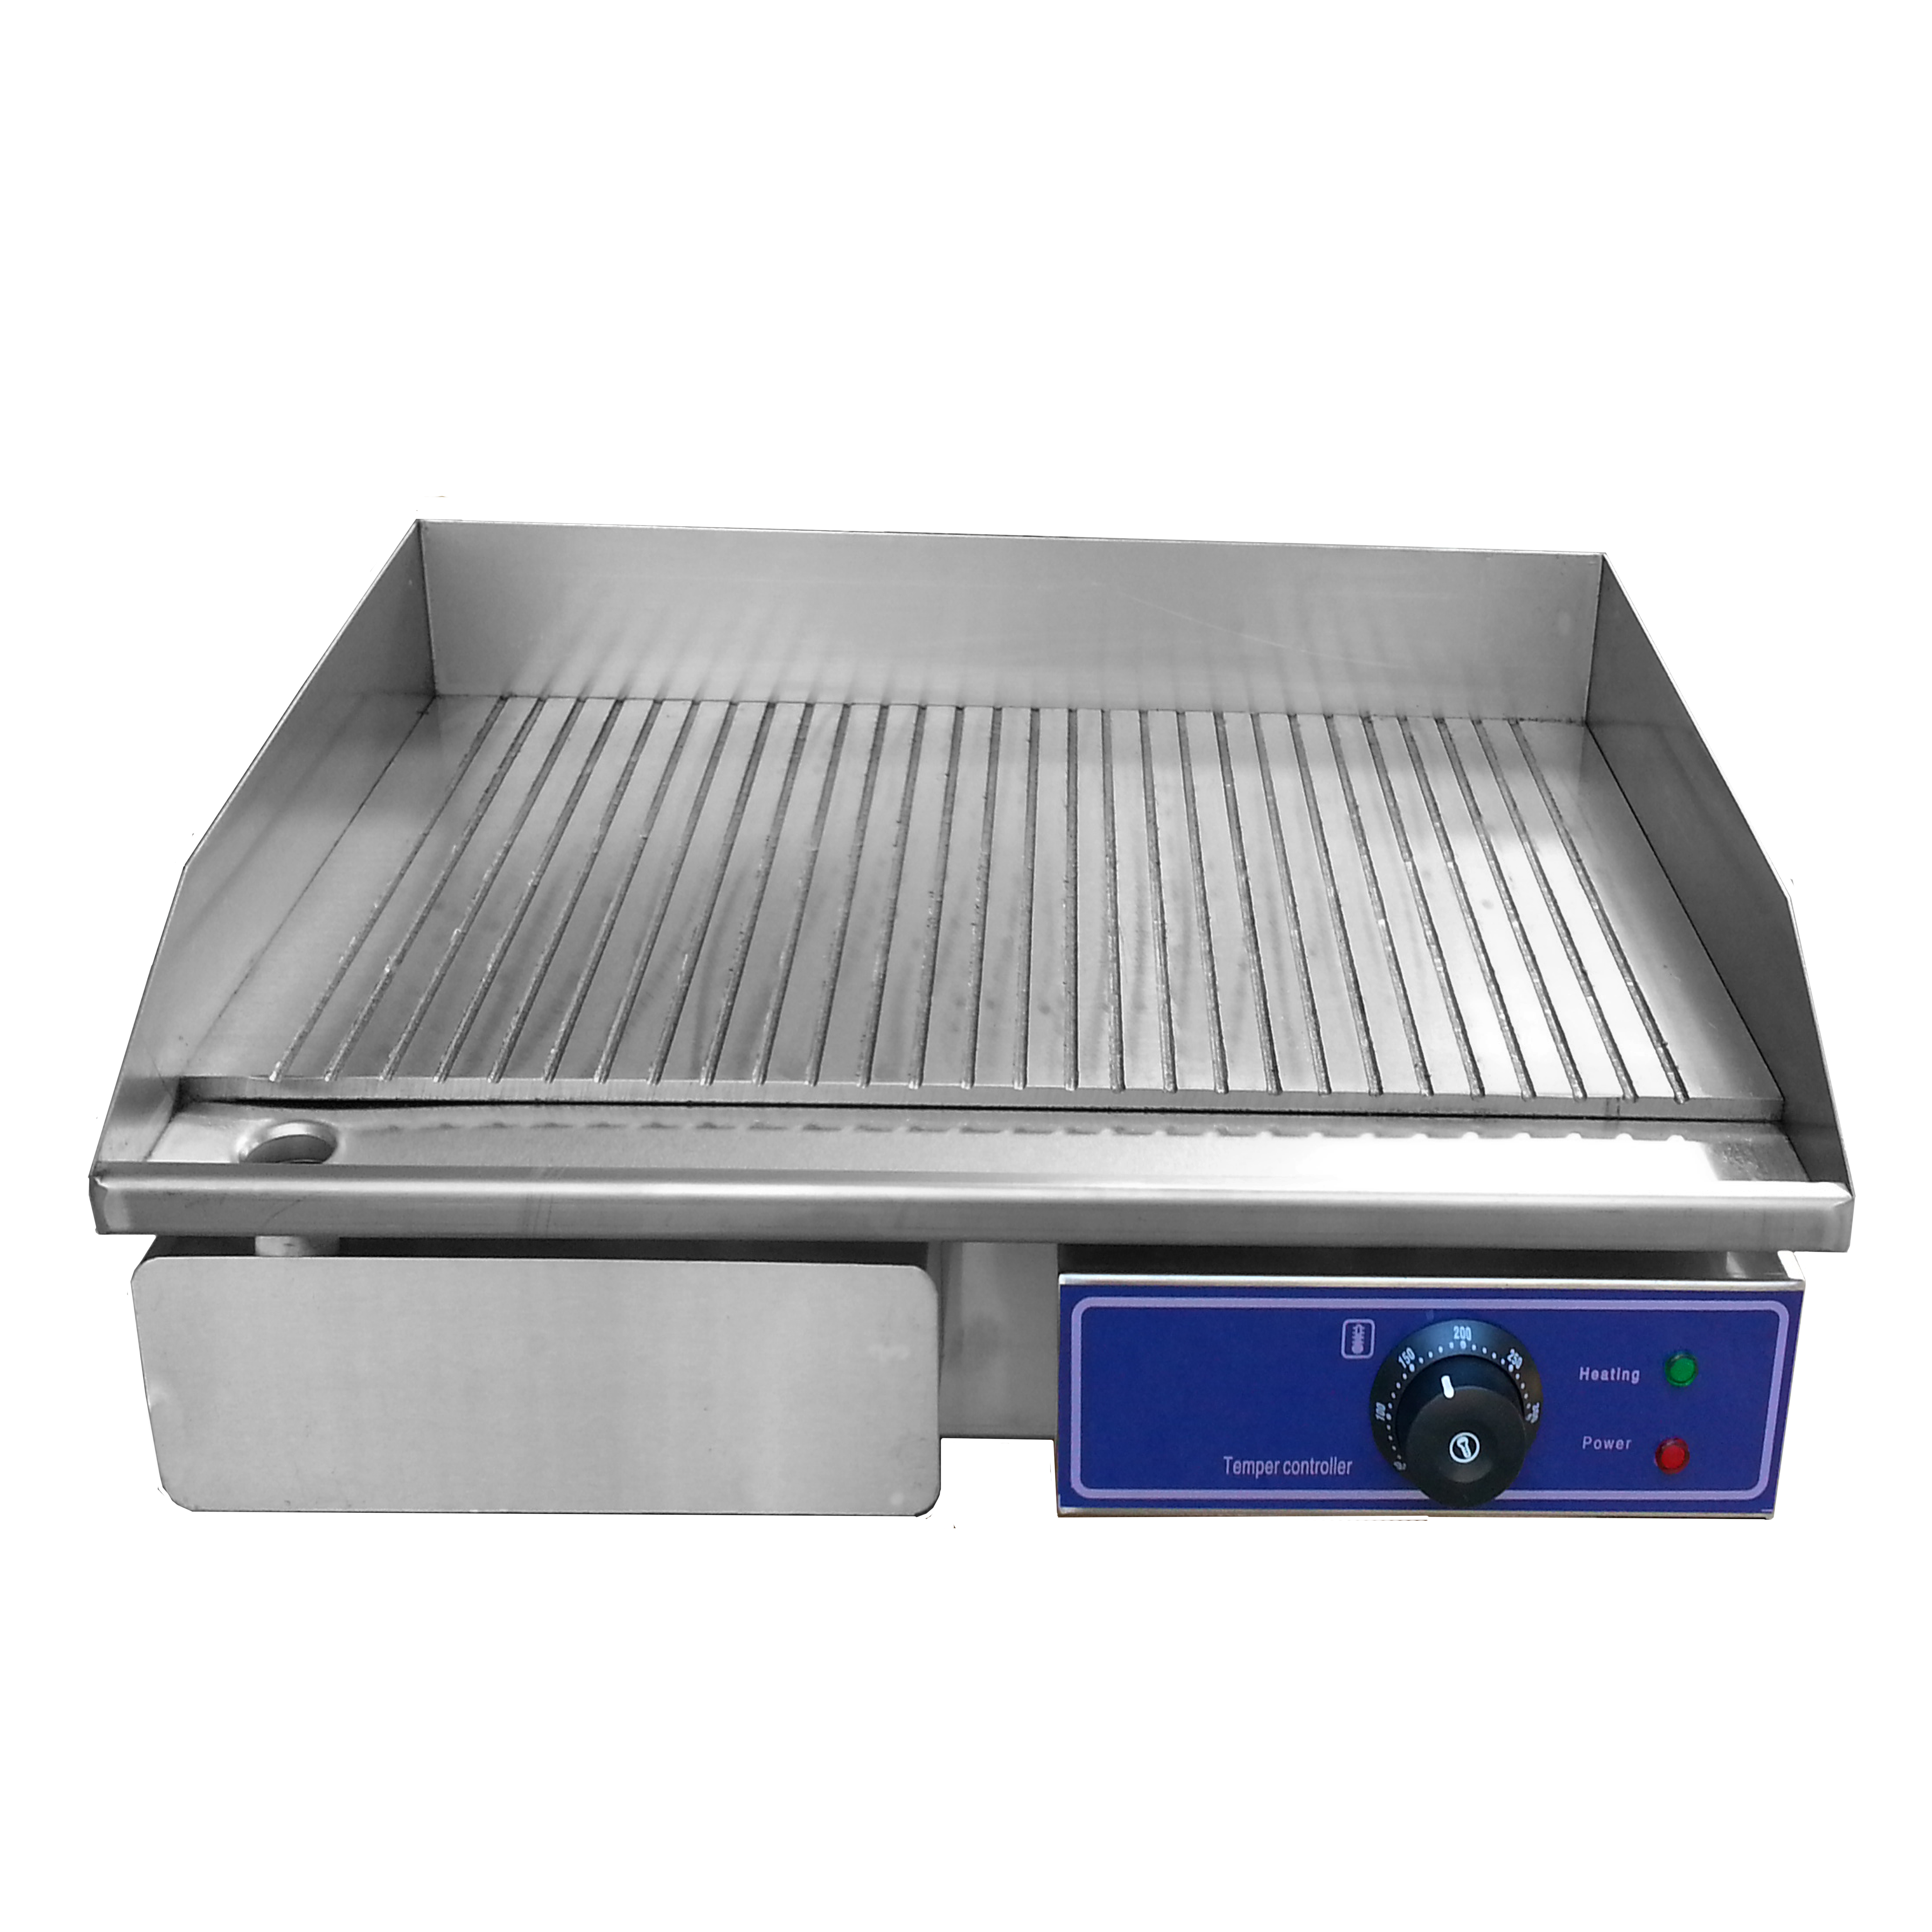 GRT-E818-3 Stainless Steel Electric Grill For Sale